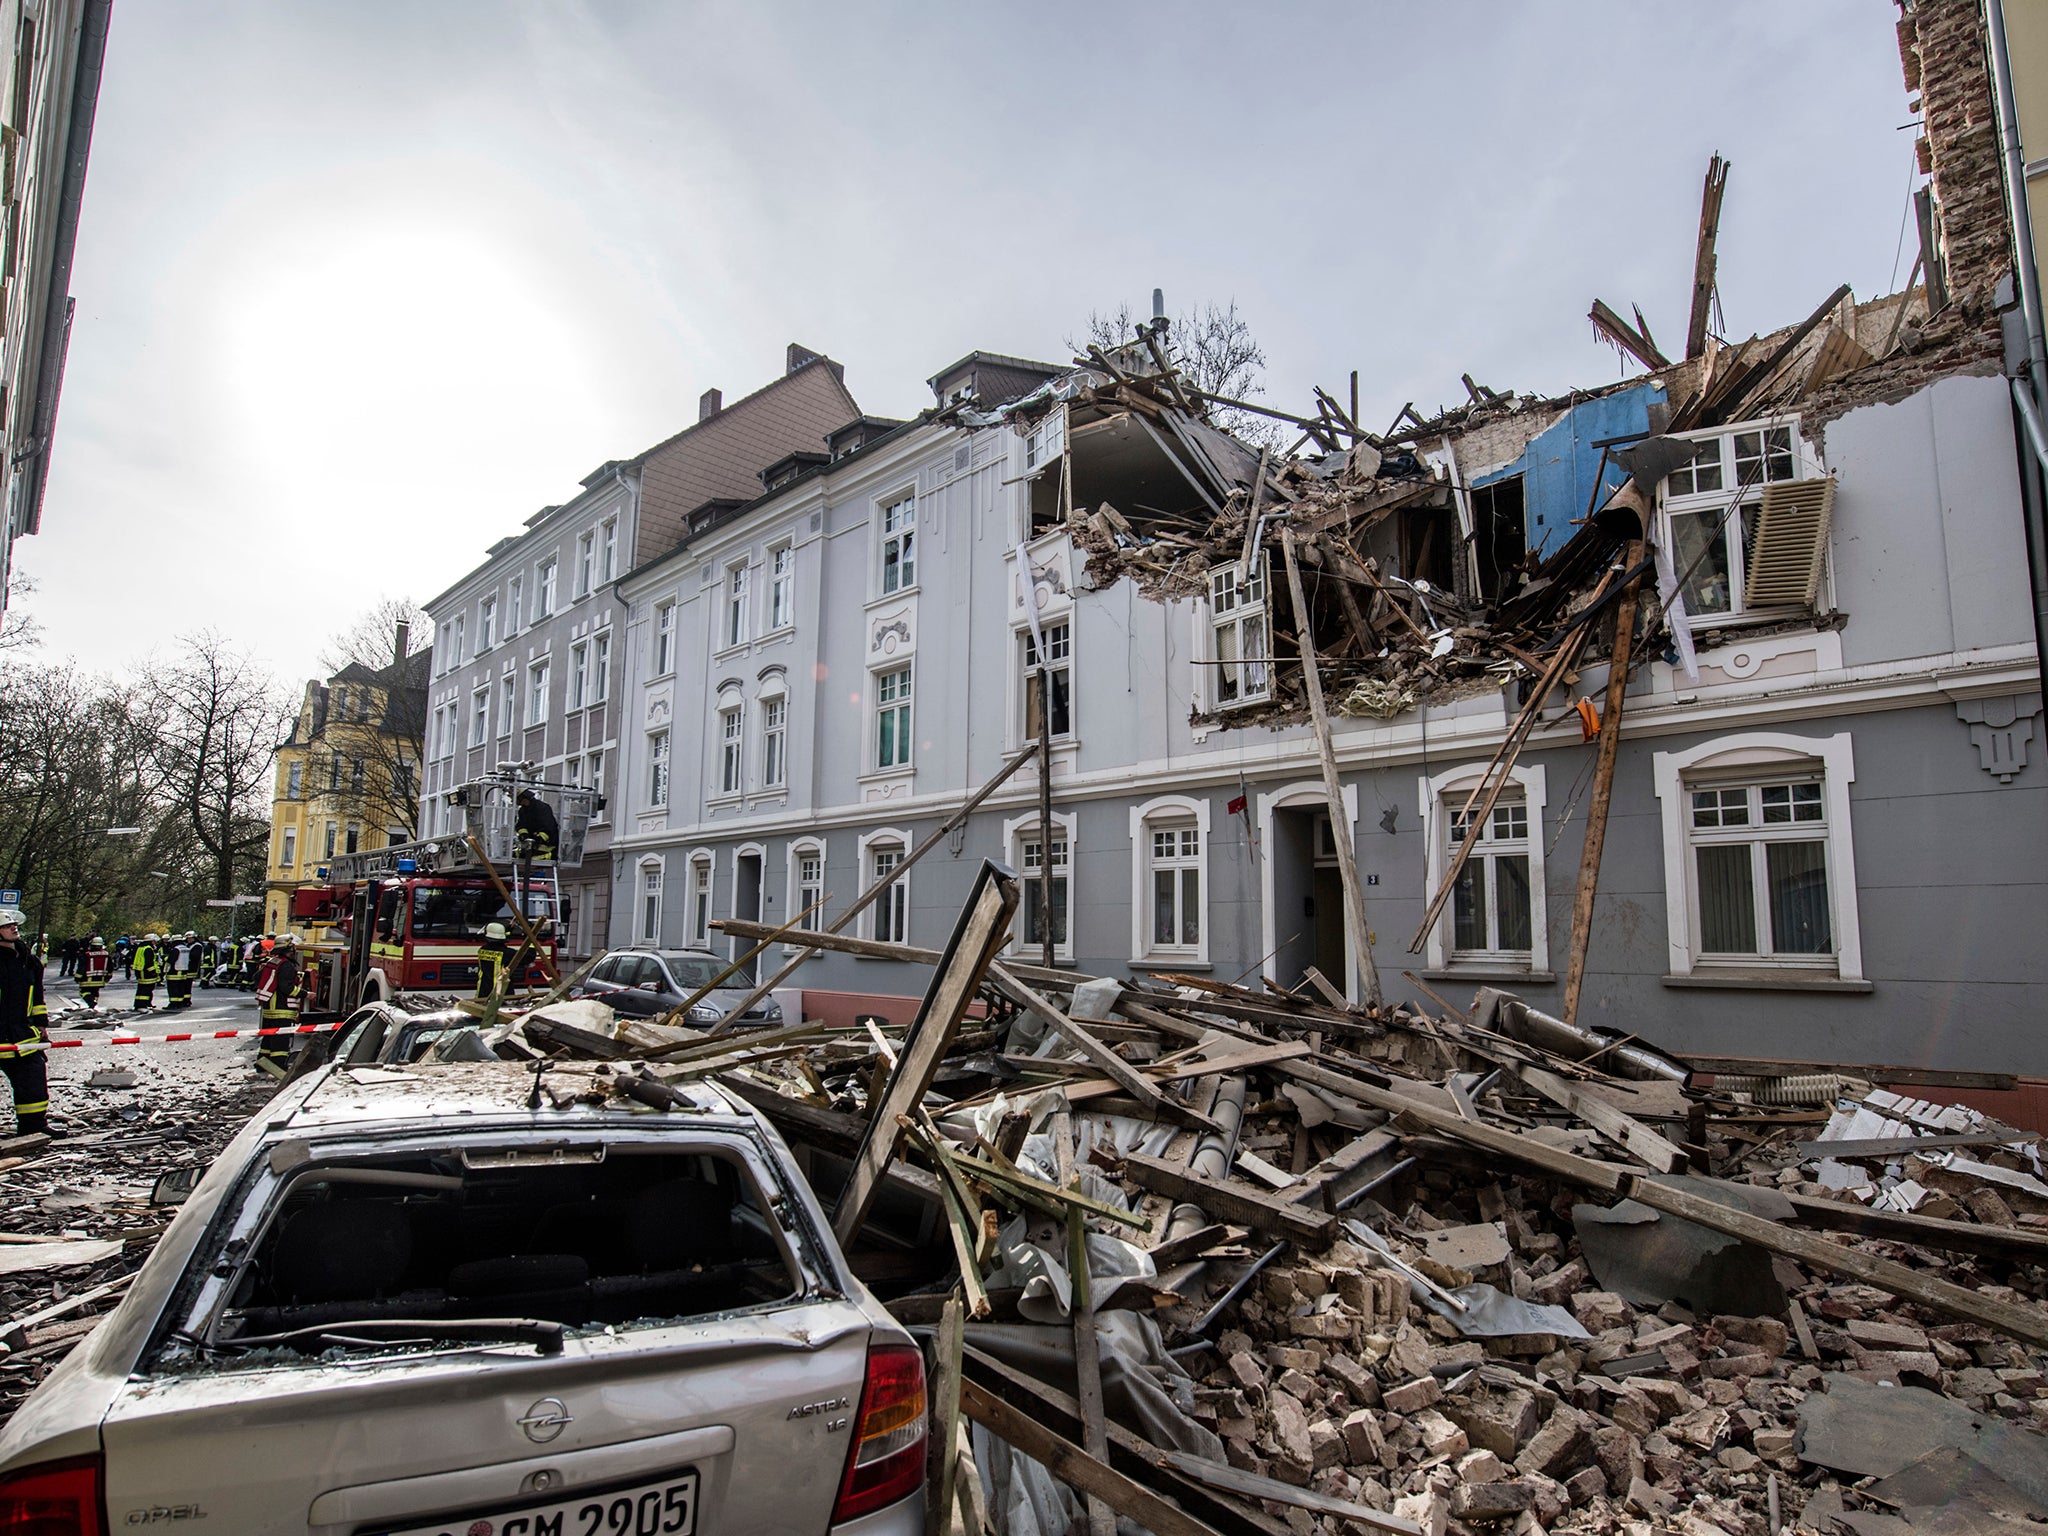 Debris sits on a street after an explosion in an apartment building in Dortmund